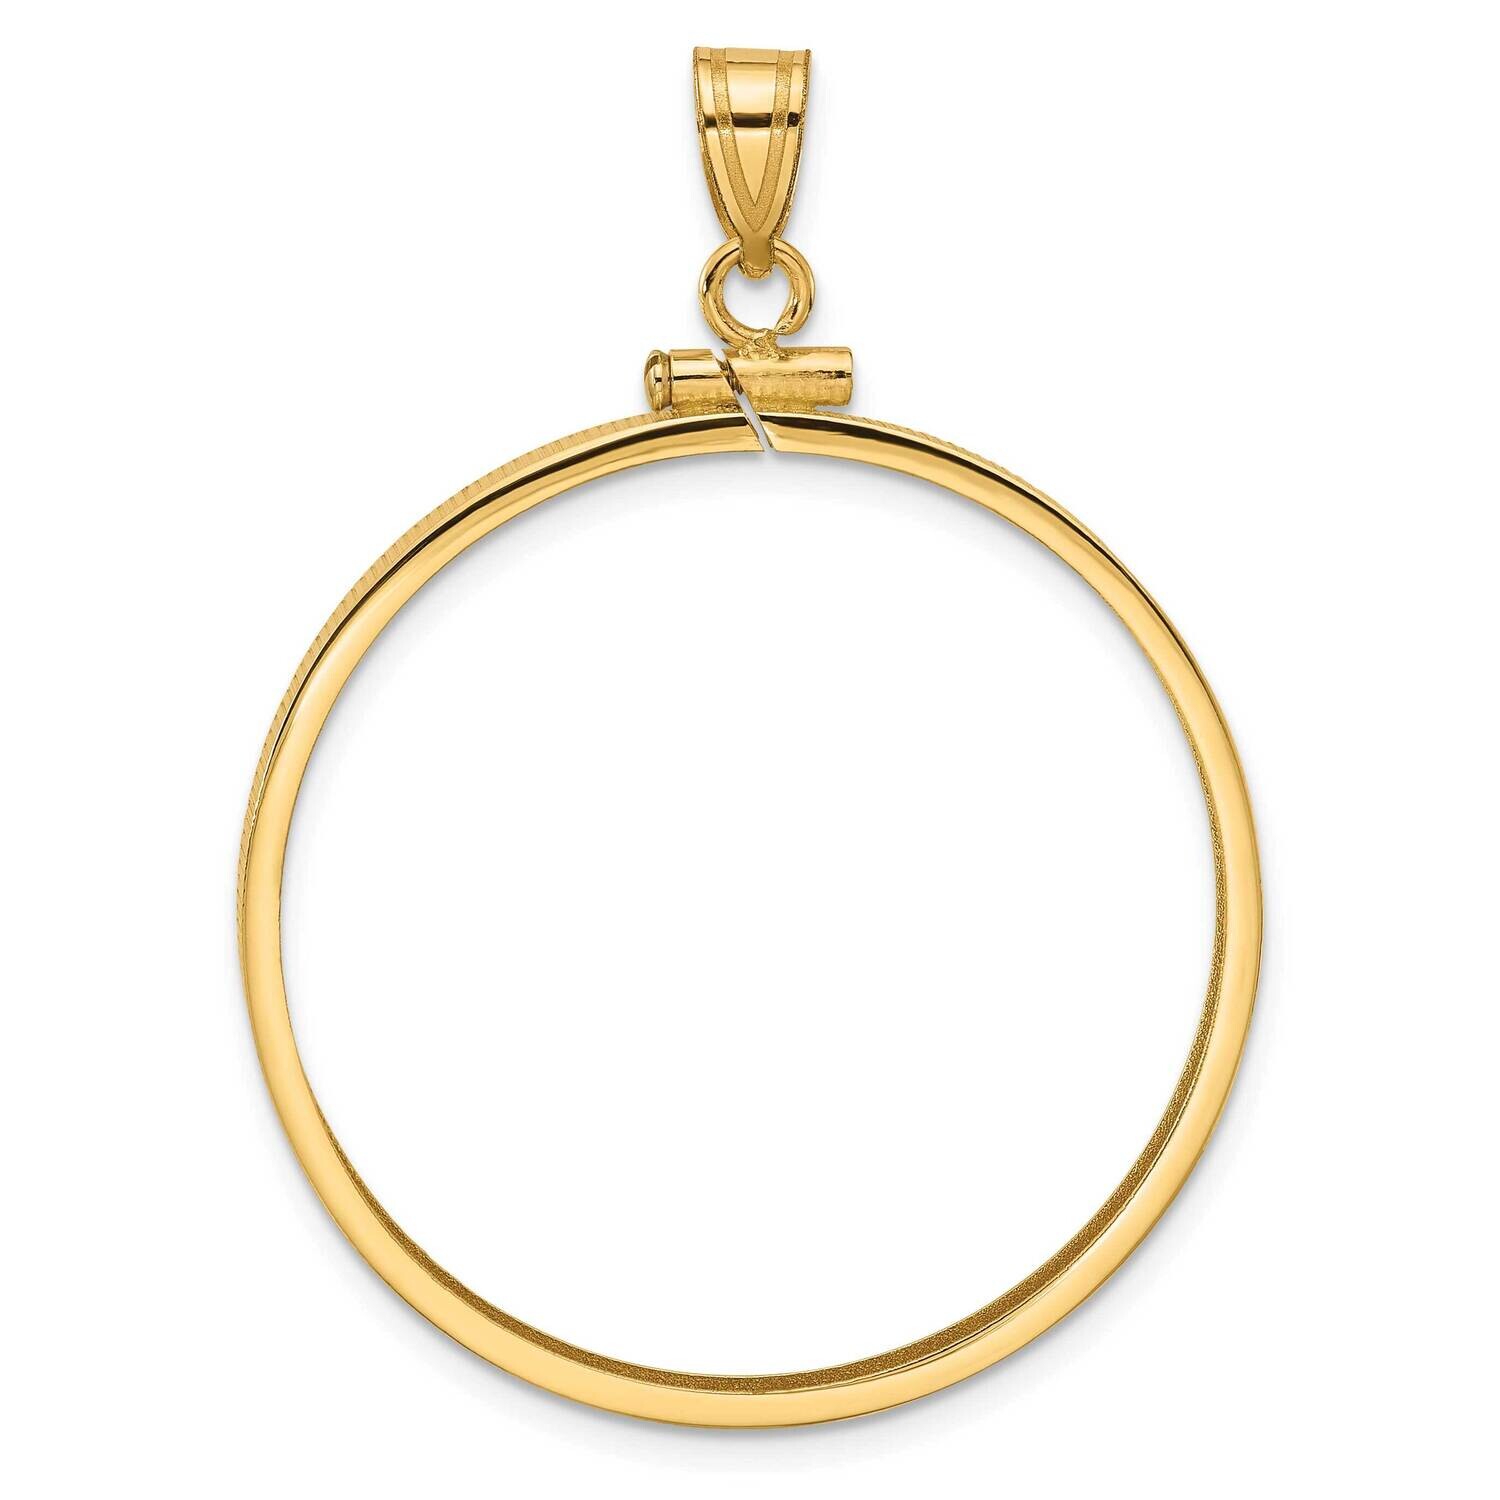 Polished Screw Top 32.0mm X 2.85mm Coin Bezel Pendant 14k Gold C1885/32.0